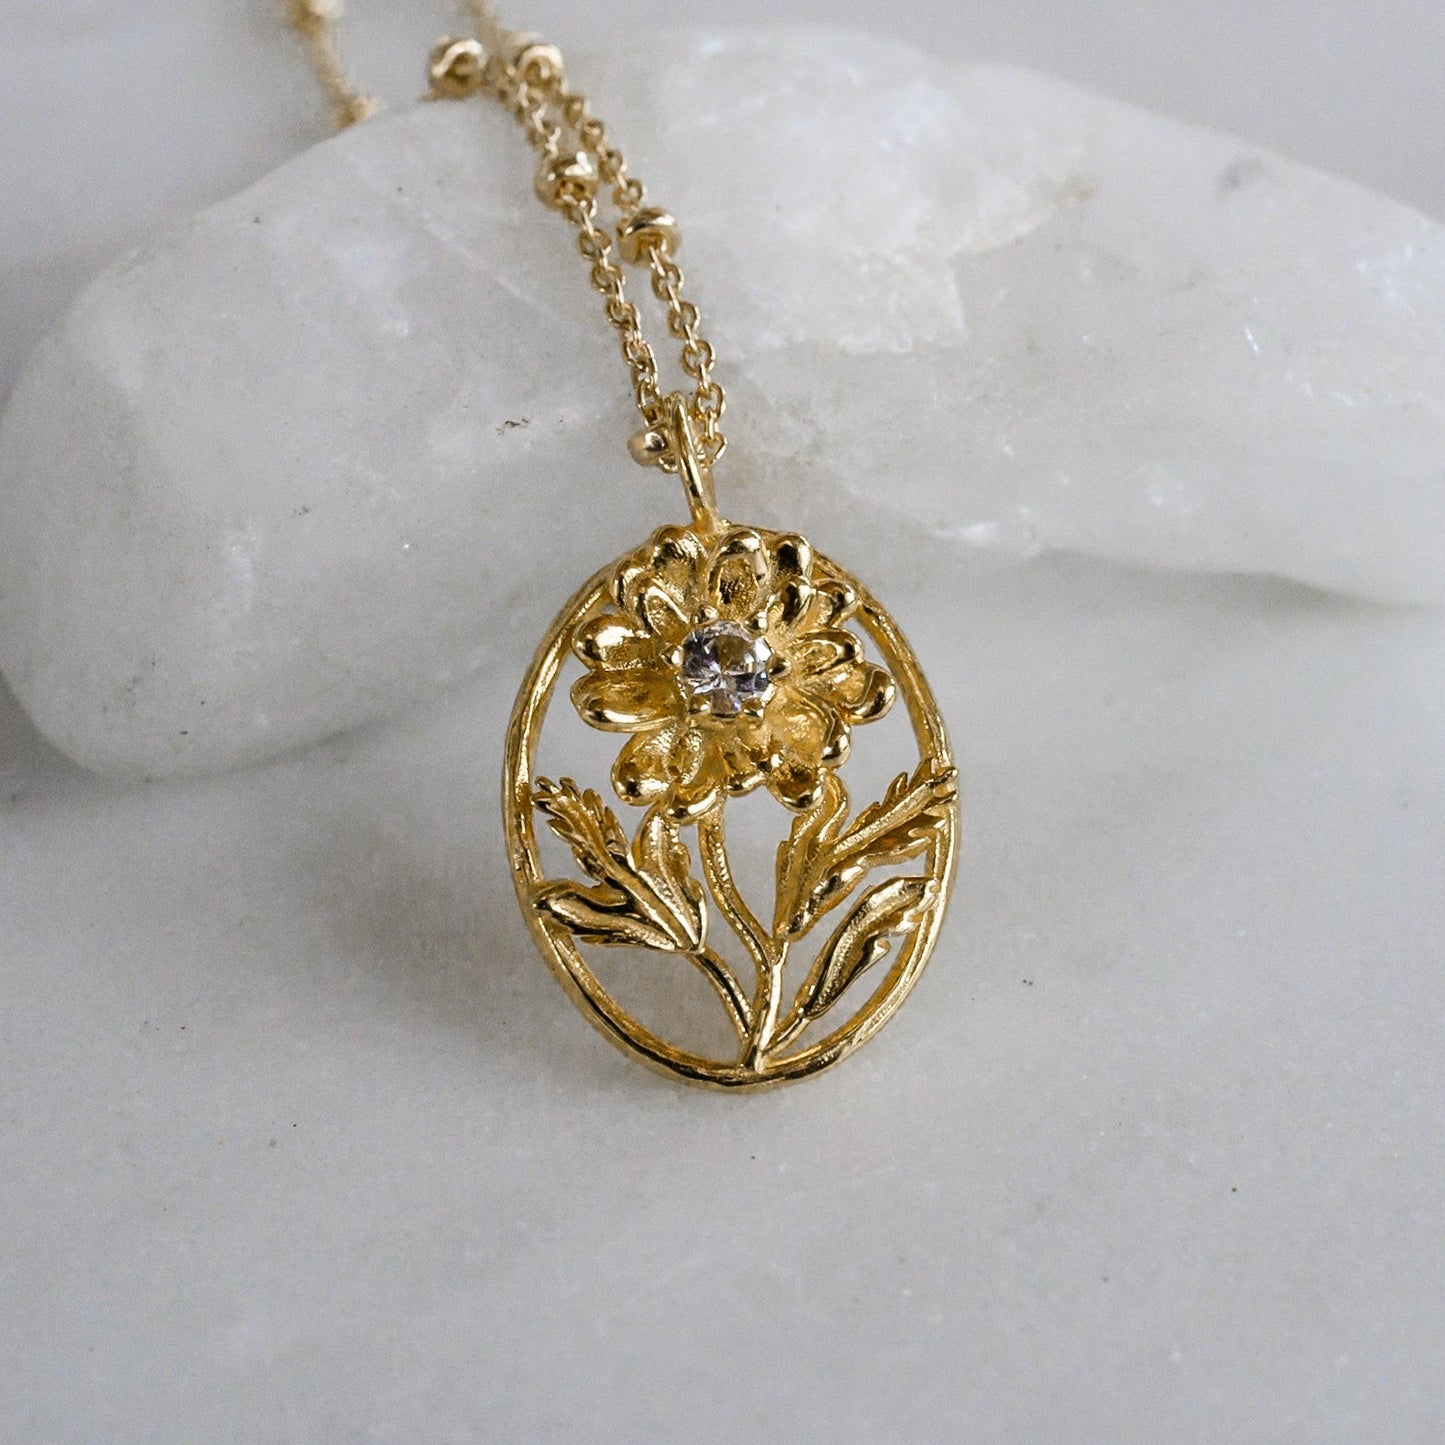 Daisy Flower Necklace - Personalized Jewelry - April Birth Month Flower Gift, Solid Gold Vermeil or Silver